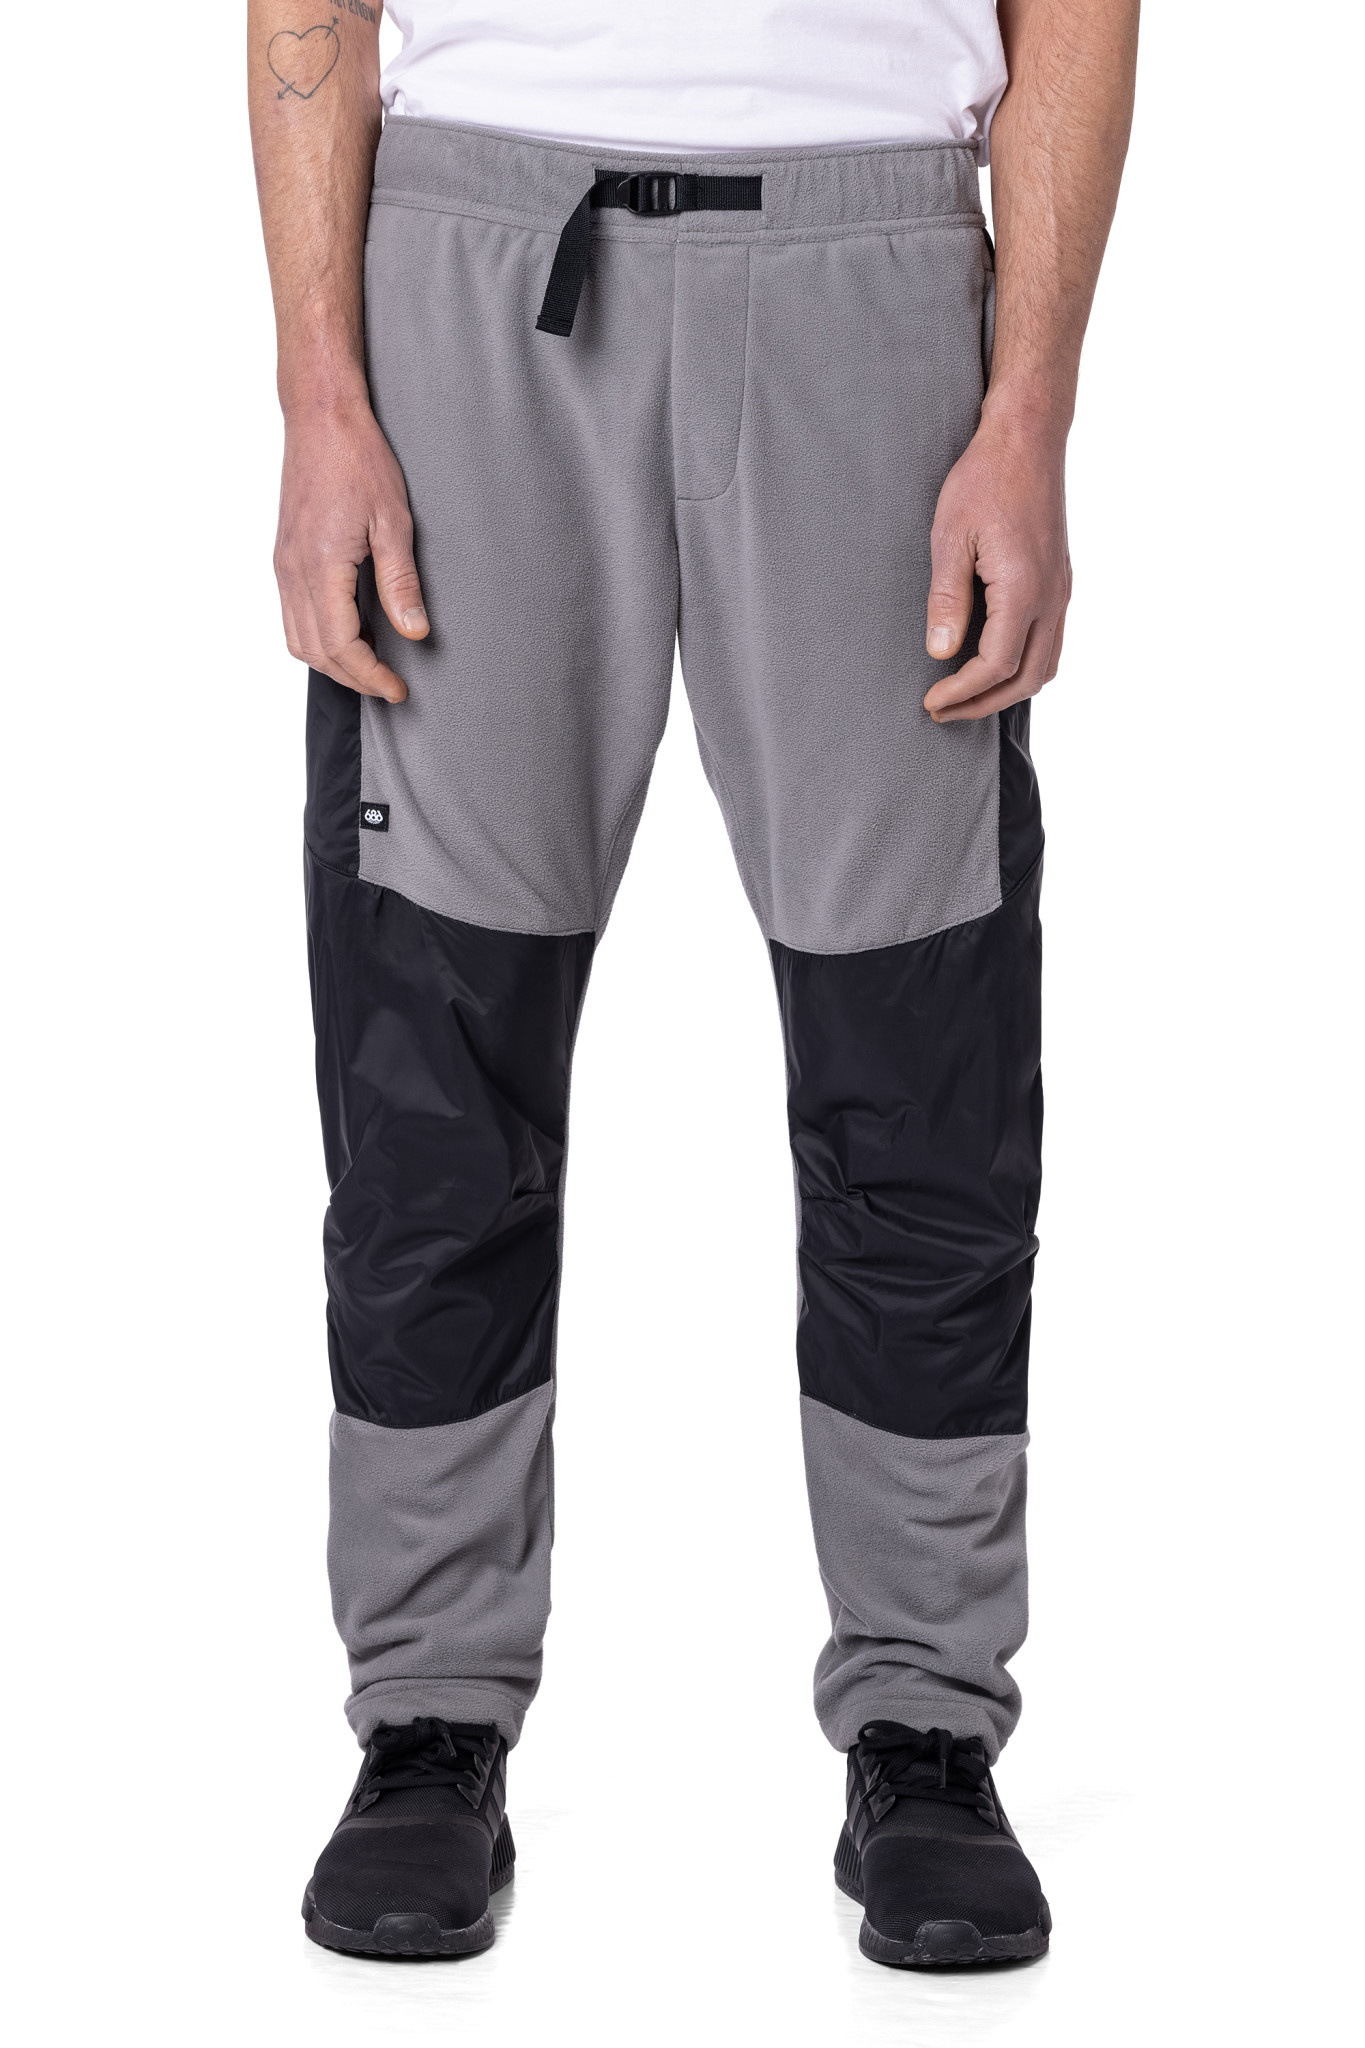 686 Men's Thermal Fleece Pant - Outtabounds